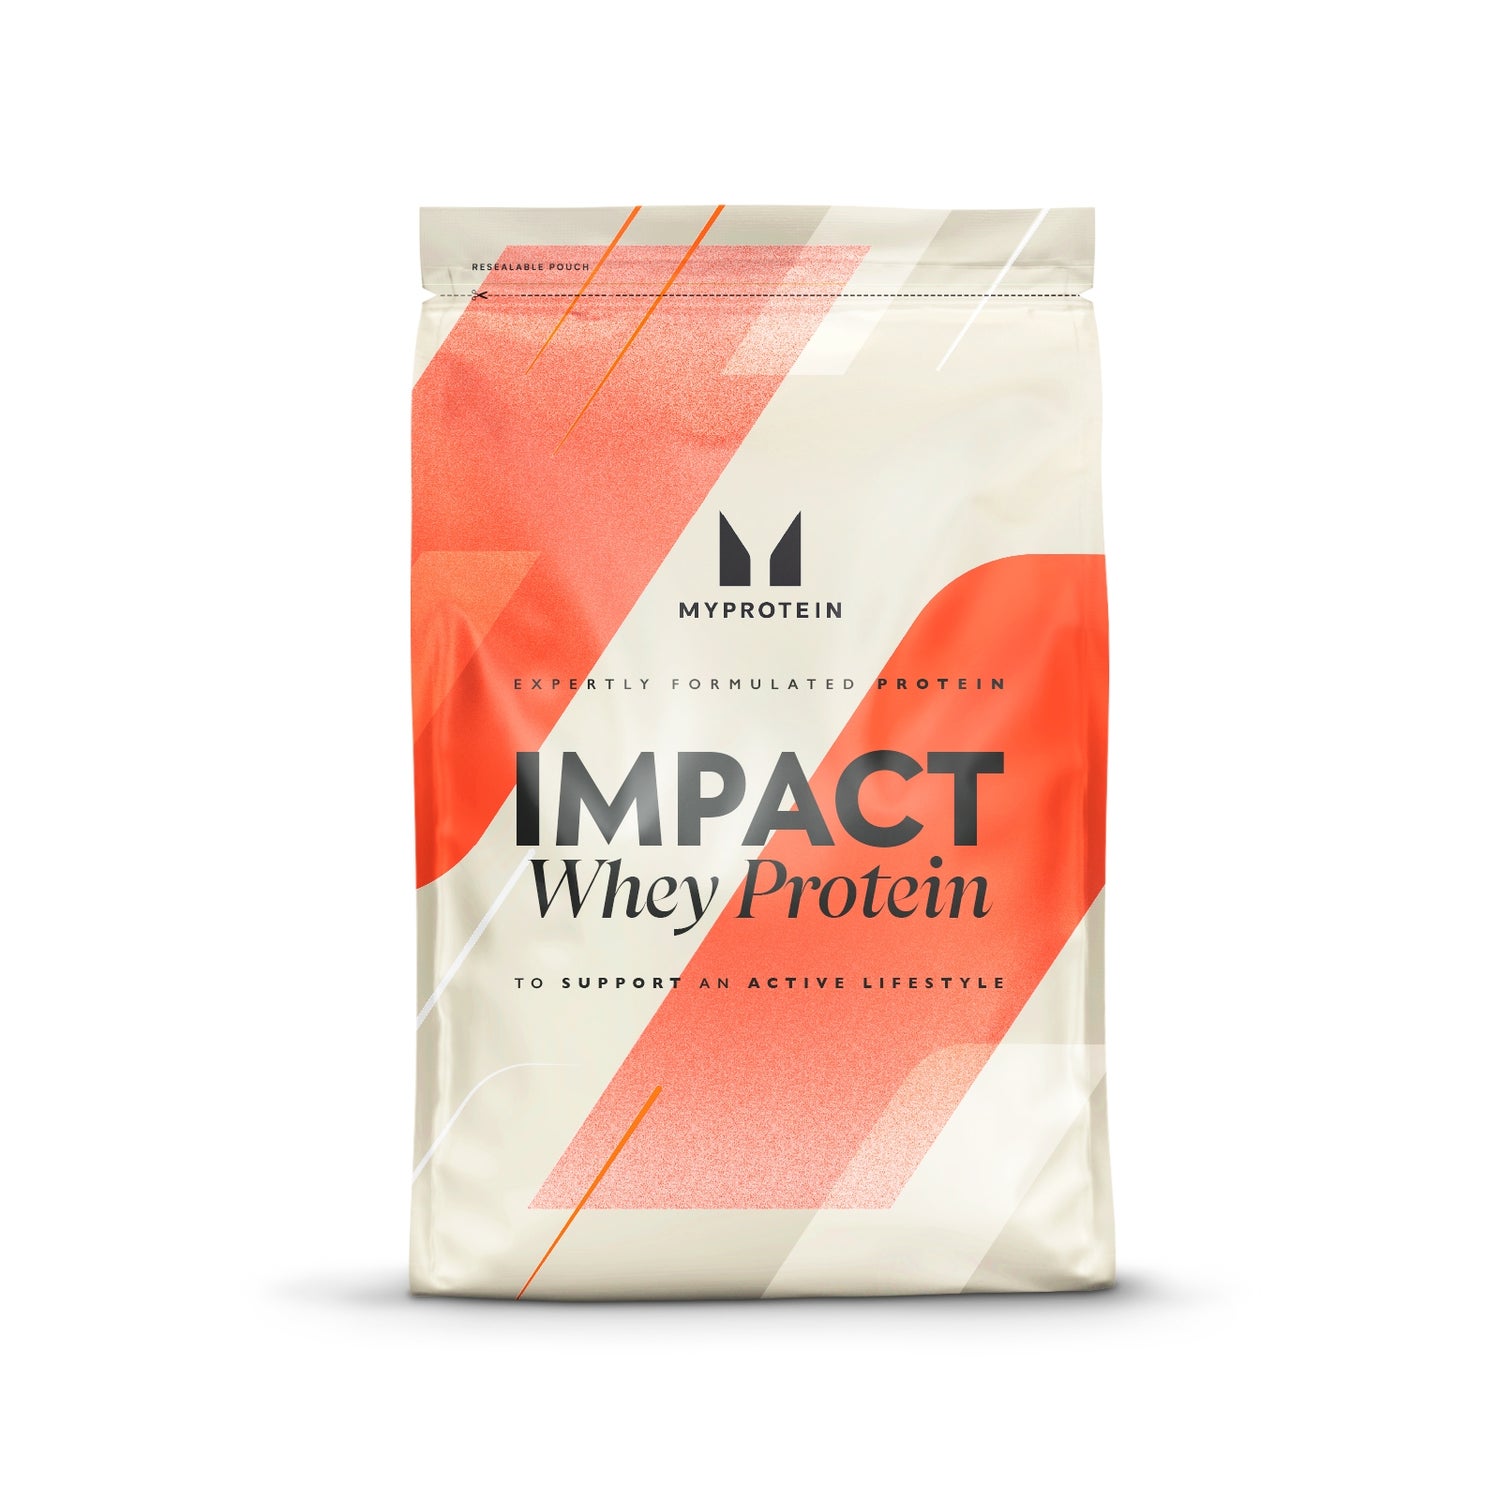 Impact Whey Protein - 1kg - Chocolate Mint